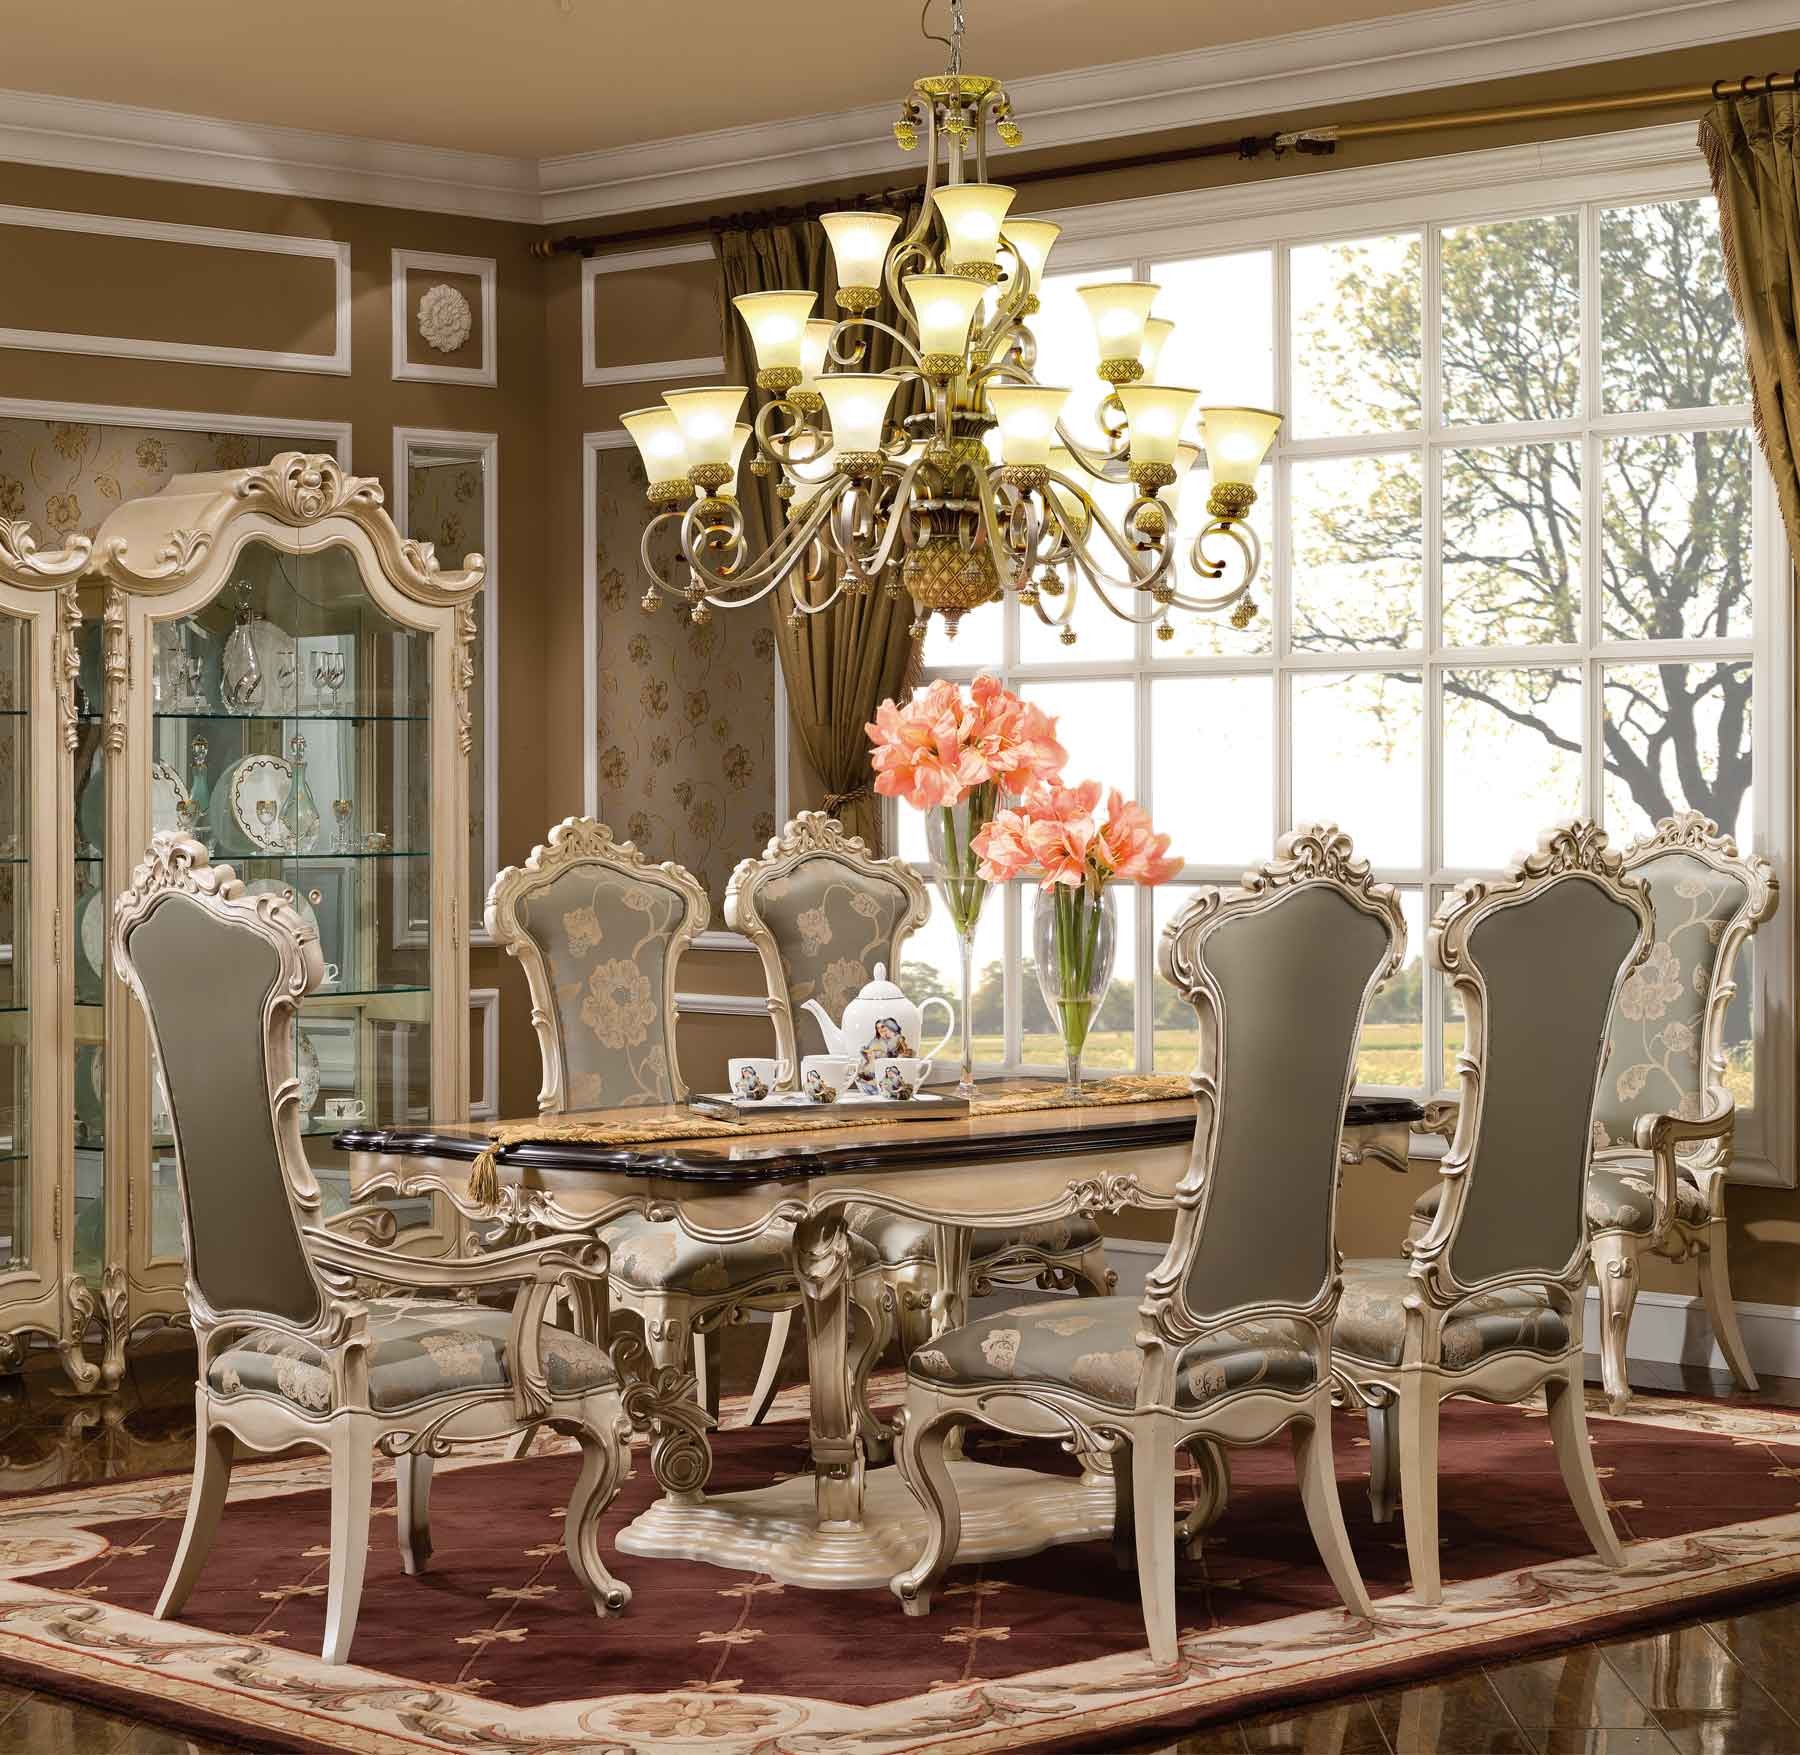 Birchwood 7-pc Dining Set shown in Egyptian Pearl finish